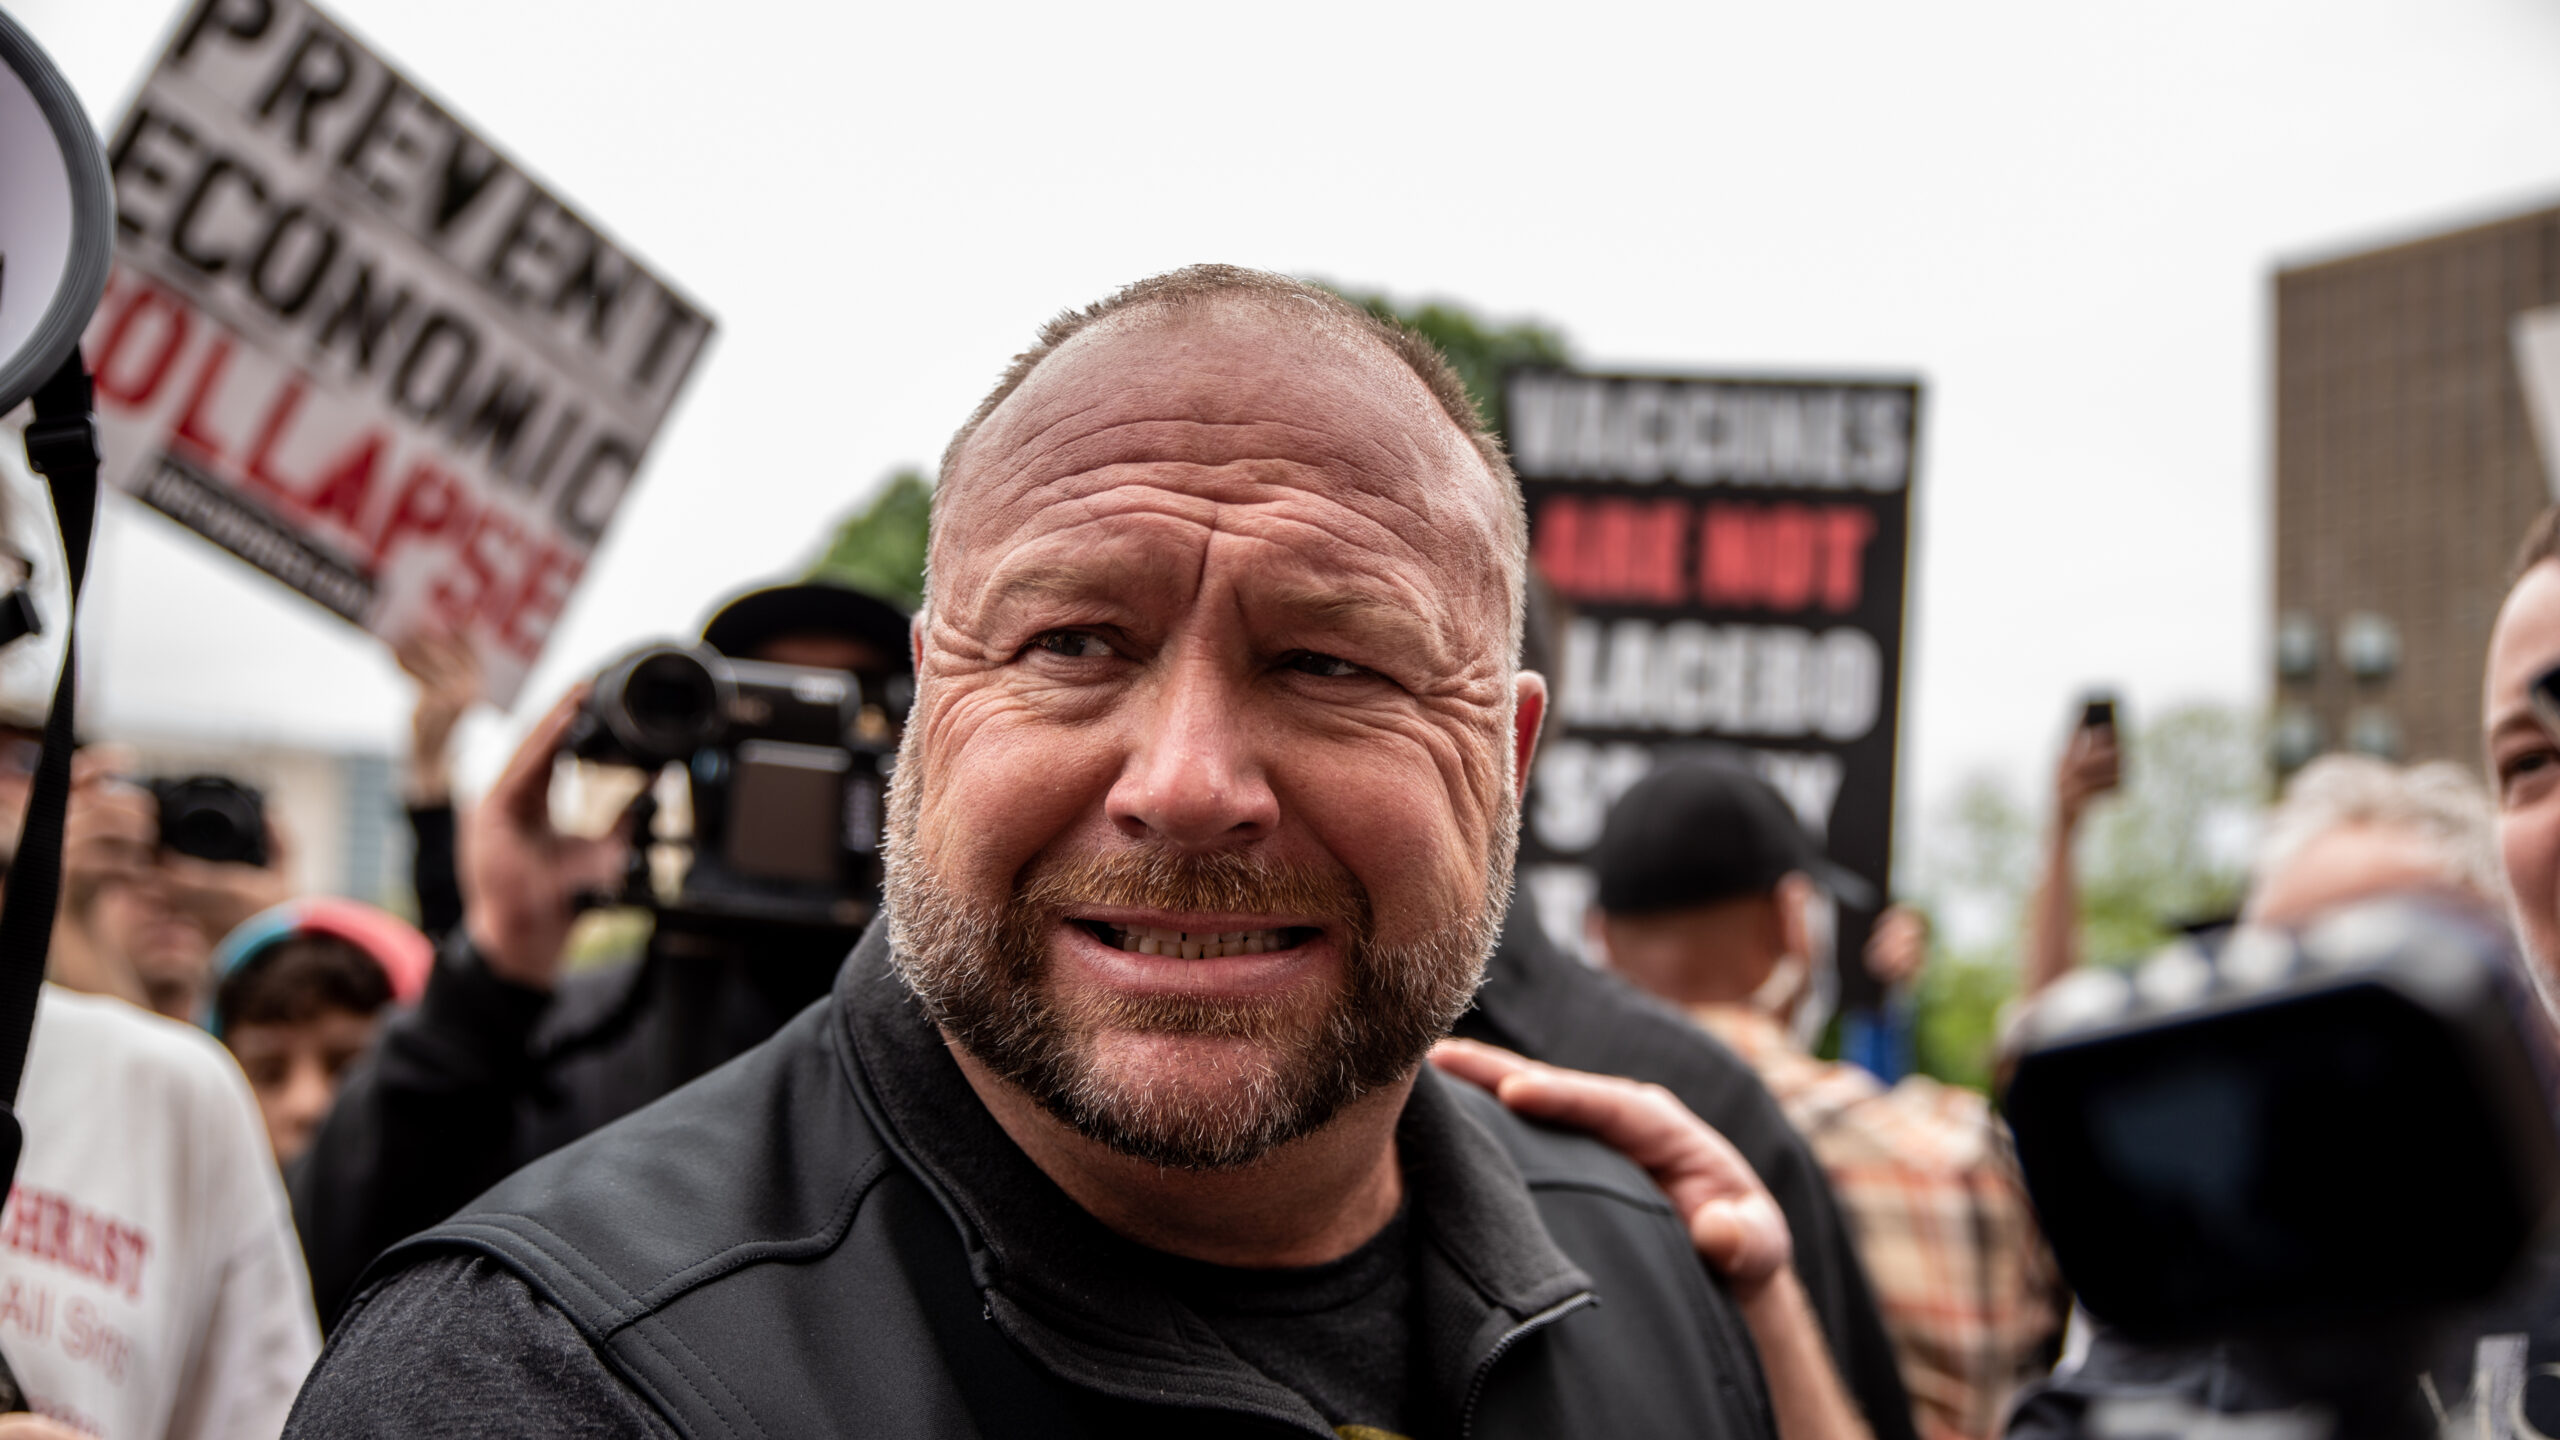 Infowars founder Alex Jones interacts with supporters at the Texas State Capital building on April 18, 2020, in Austin.